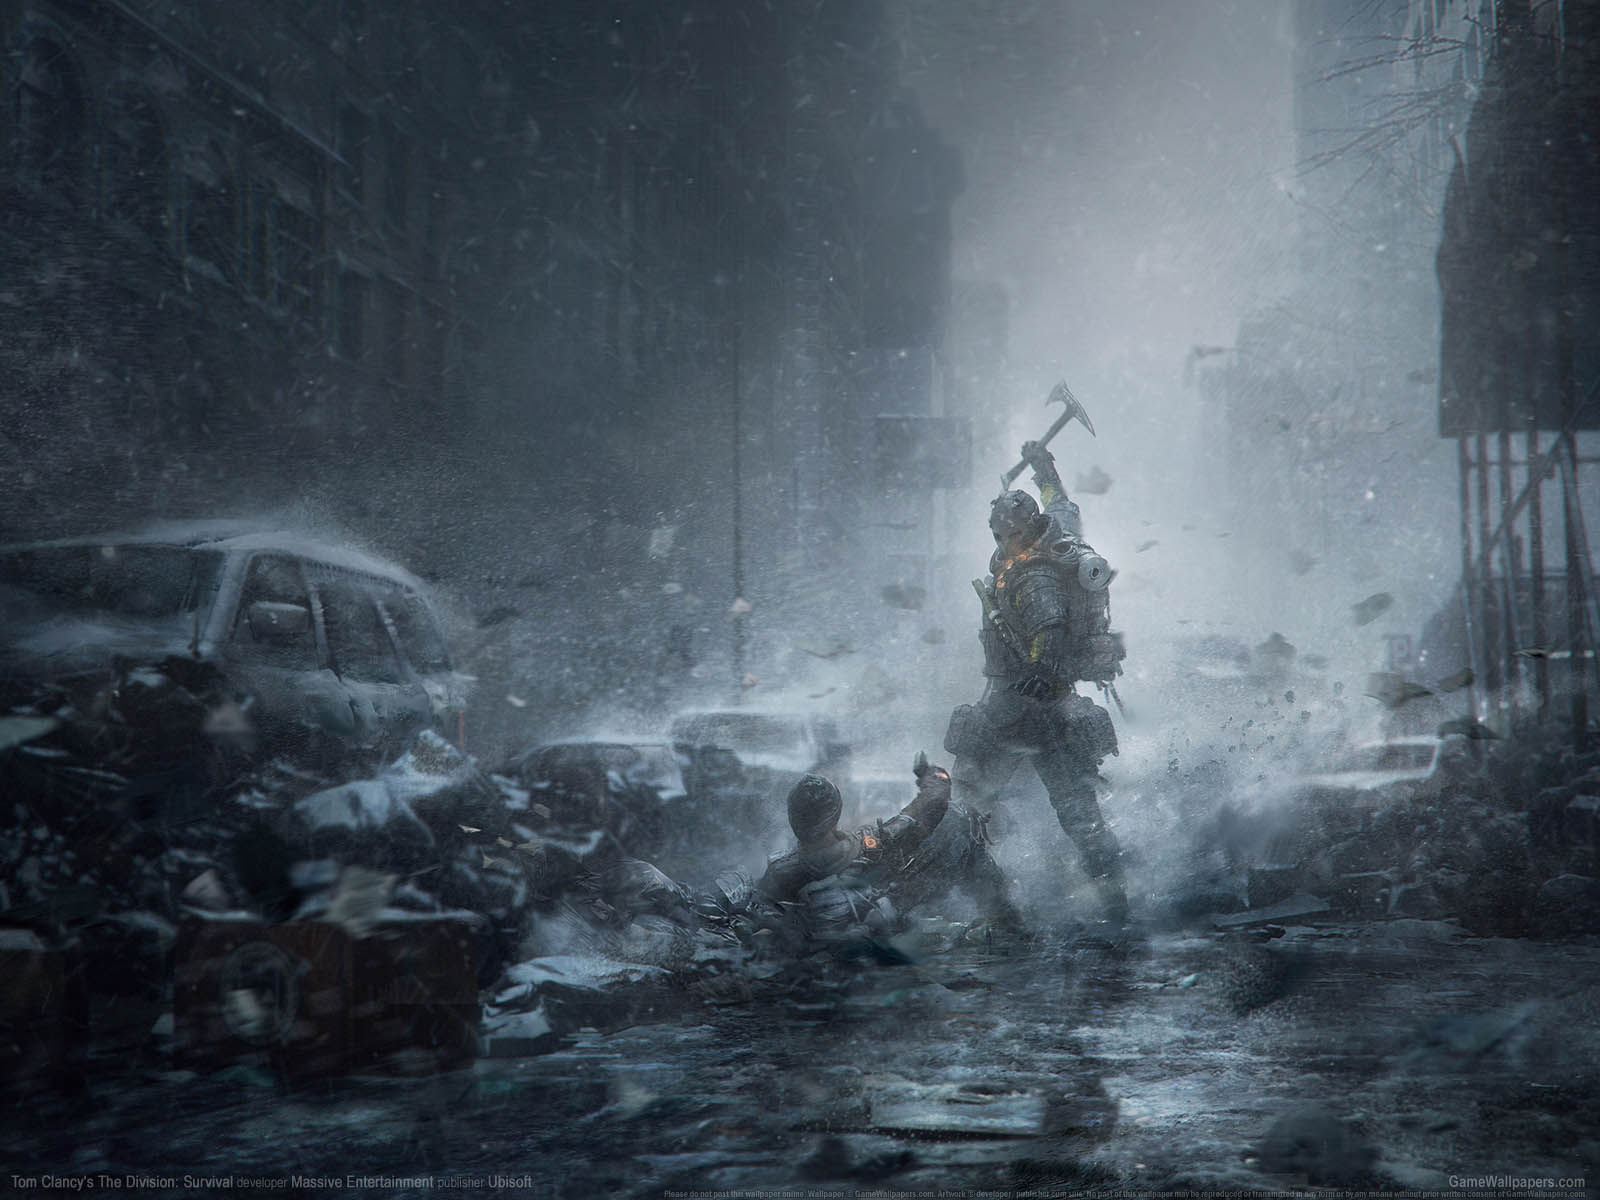 Tom Clancy's The Division: Survivalνmmer=02 fond d'cran  1600x1200